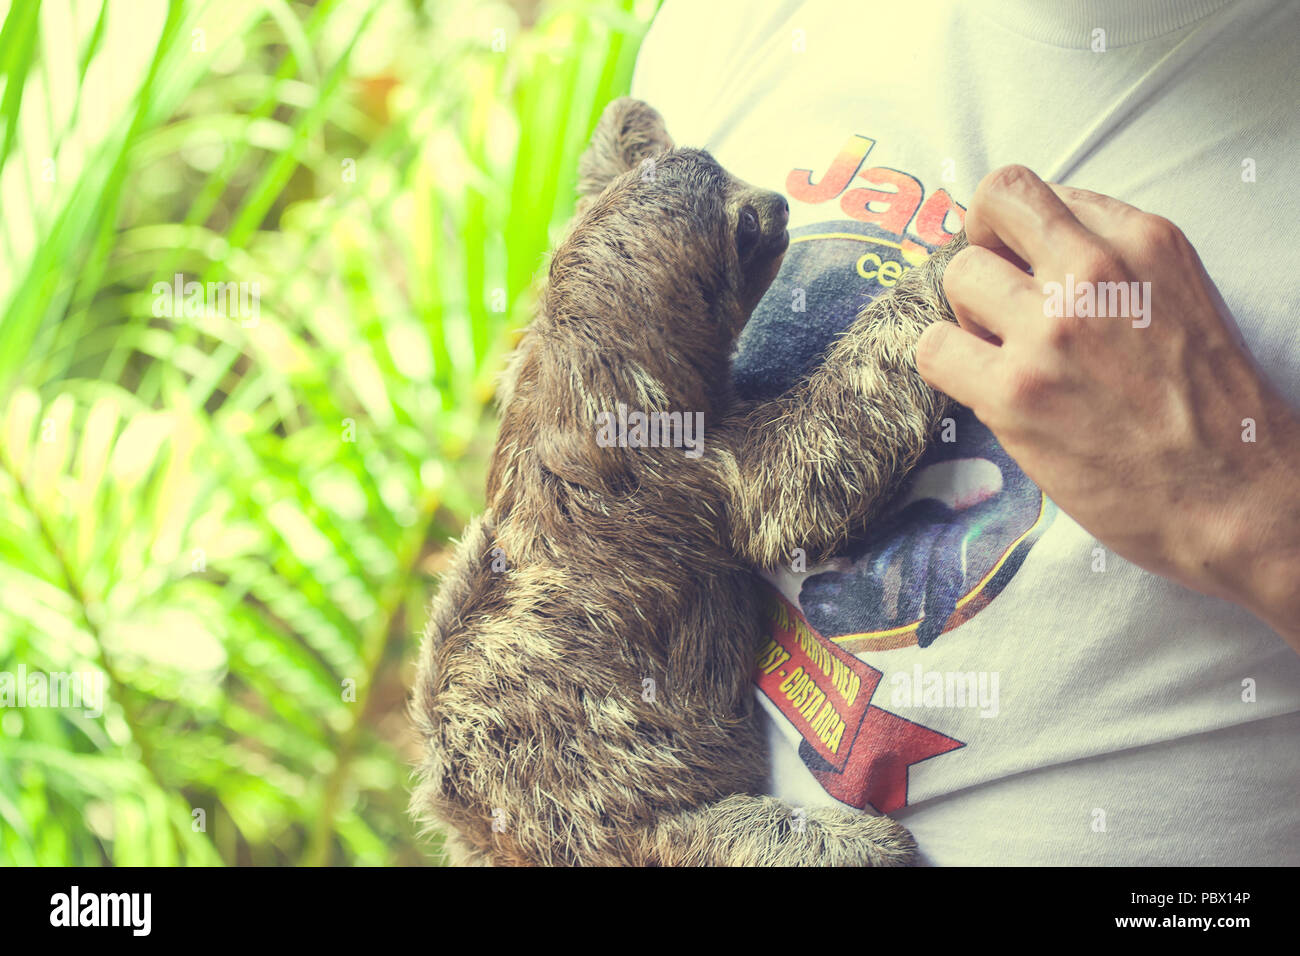 Young baby sloth climbing on a volunteer at a rescue center Stock Photo